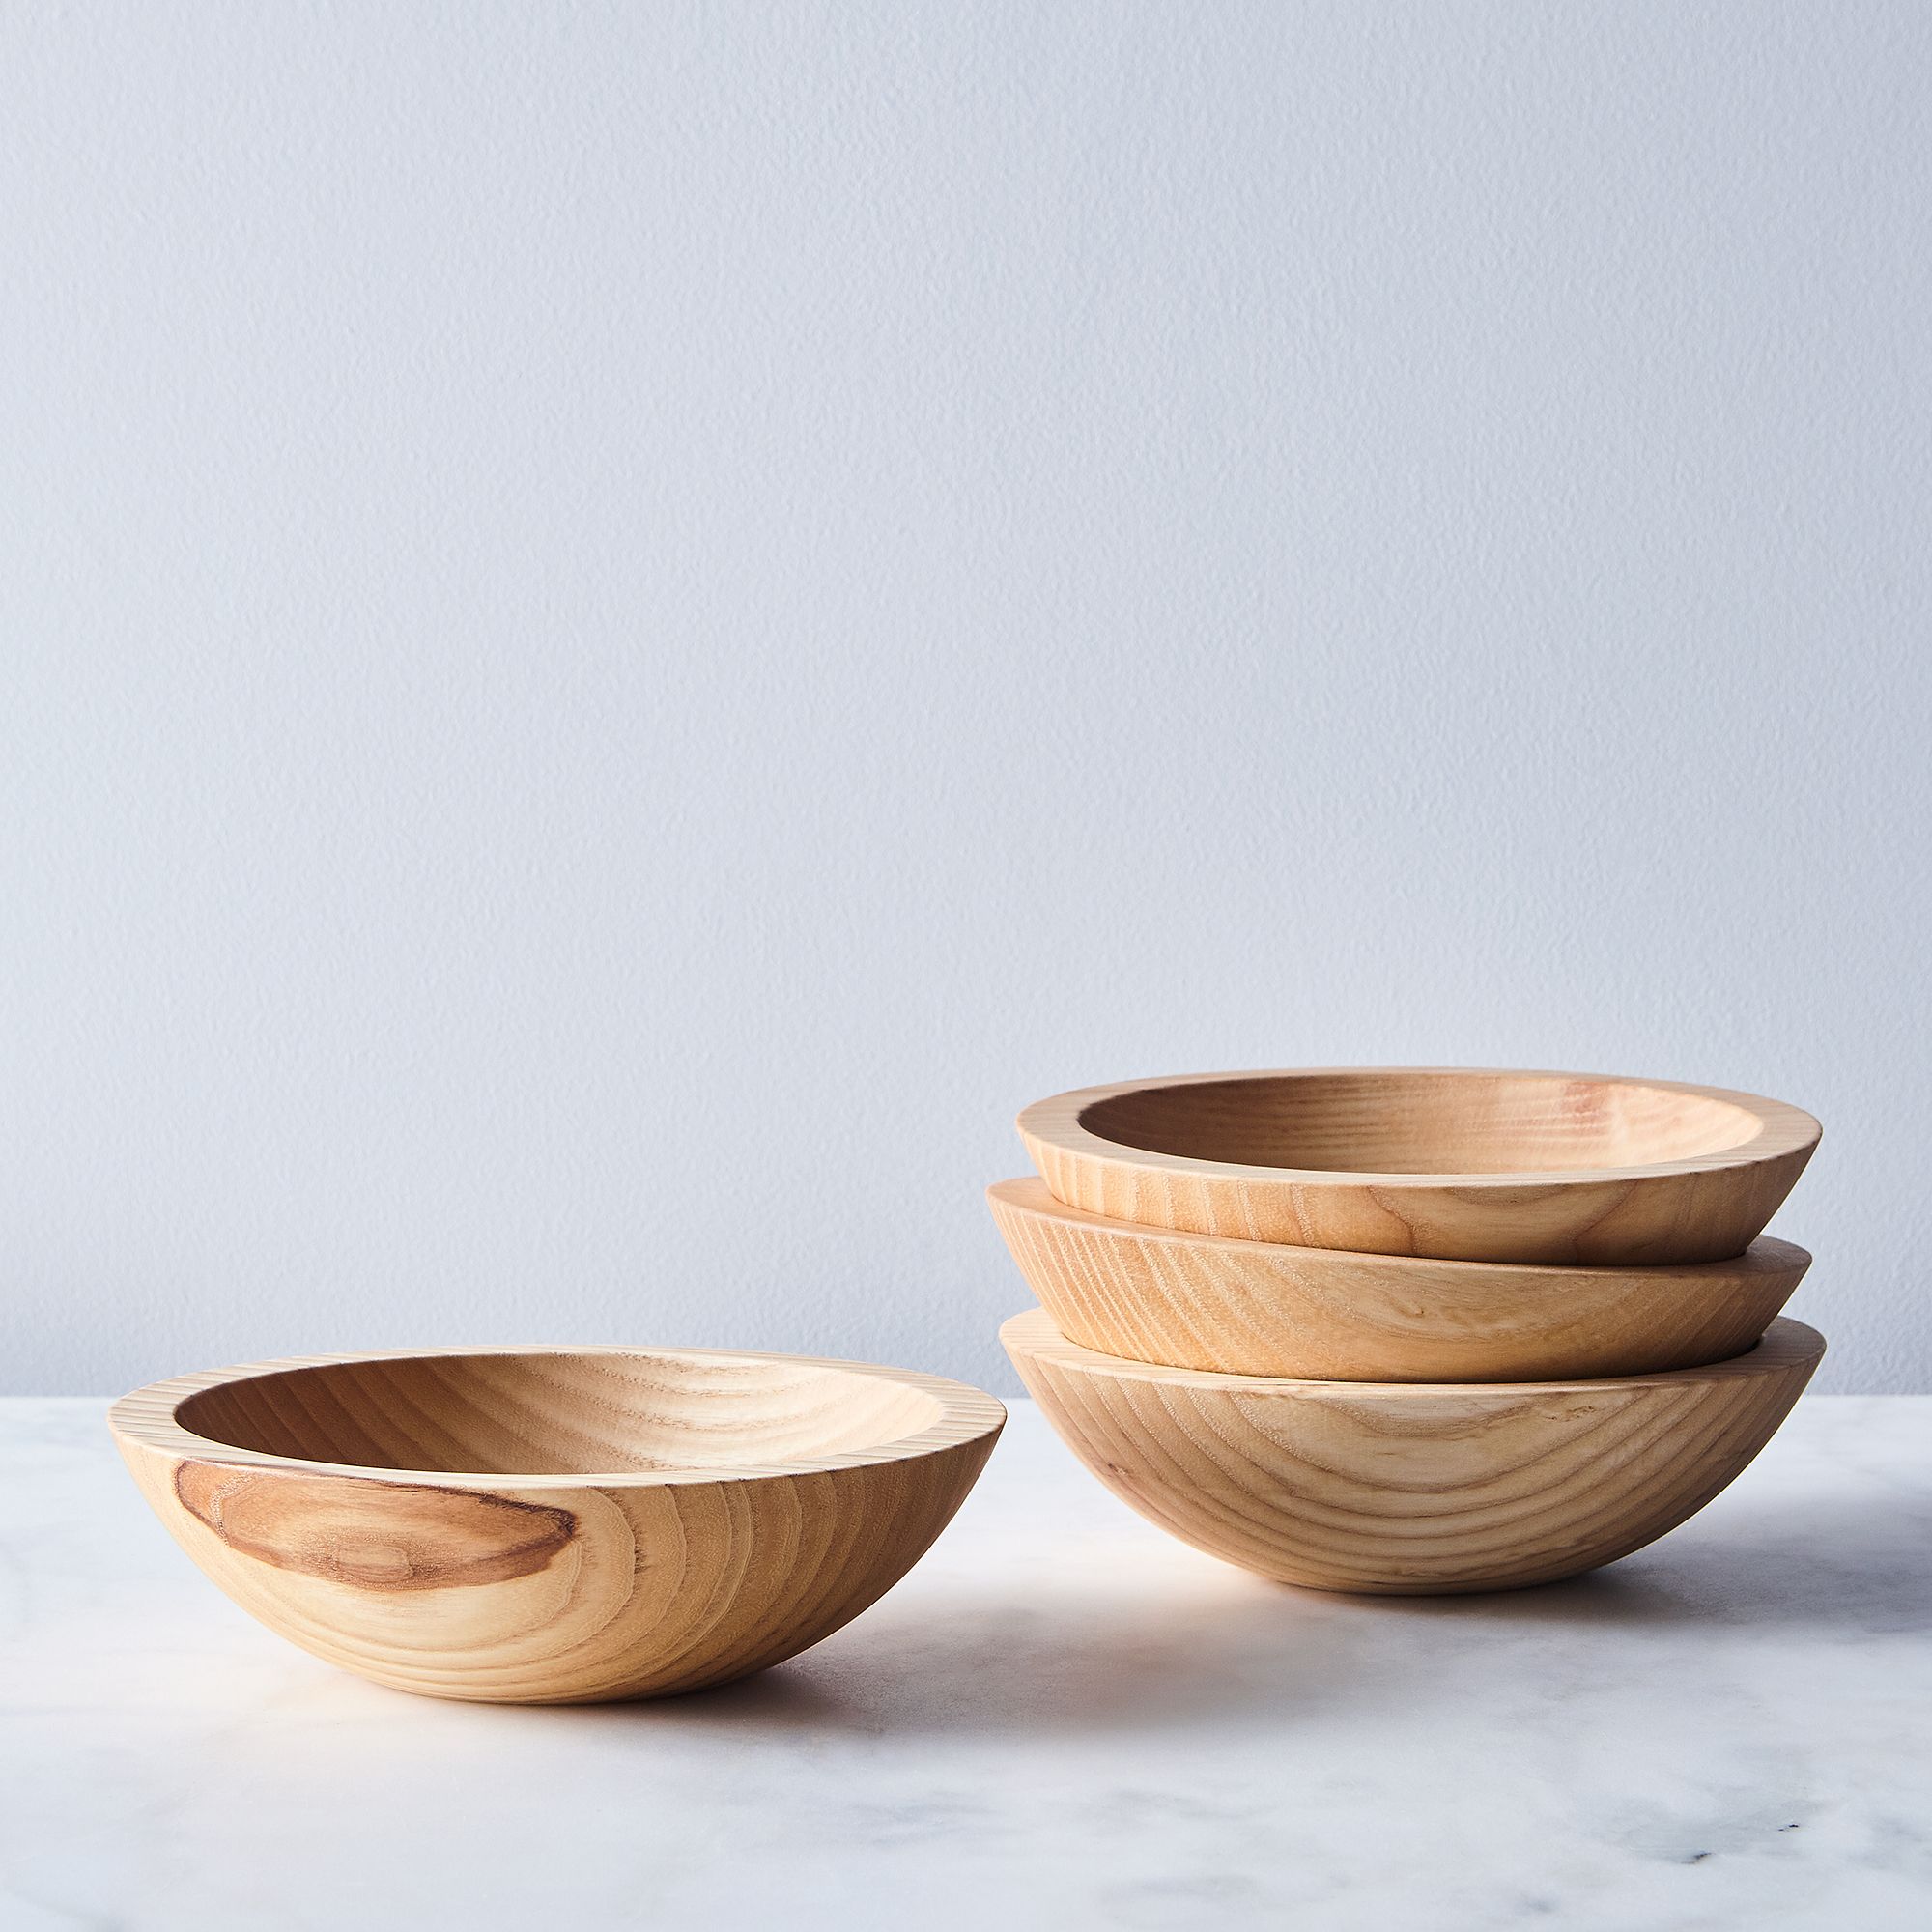 four wood bowls on a light background